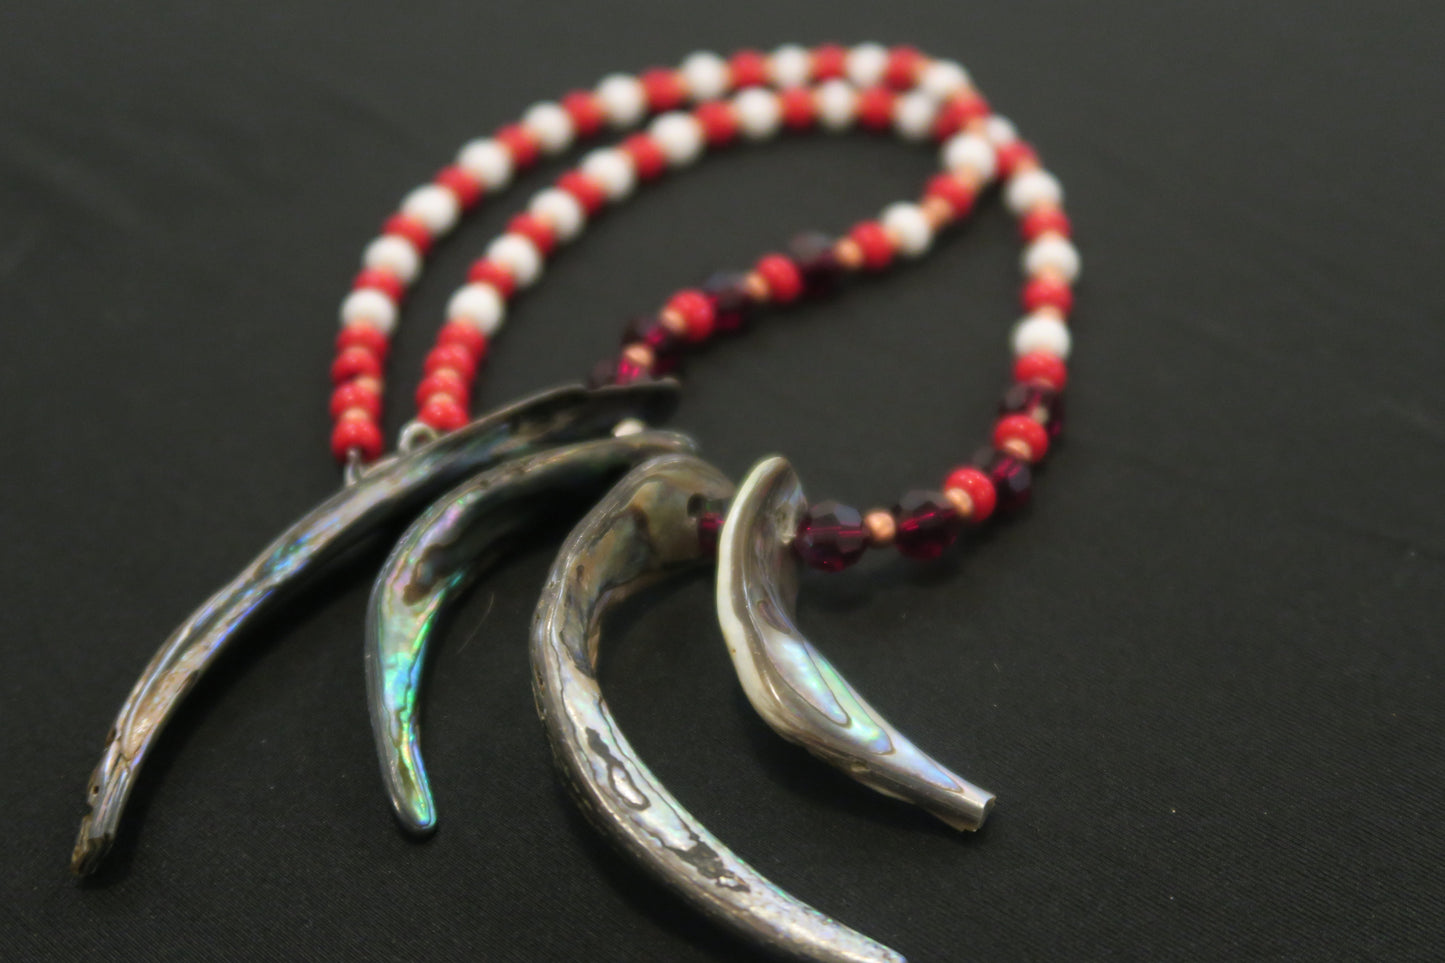 Abalone necklace with copper, red & white accents,